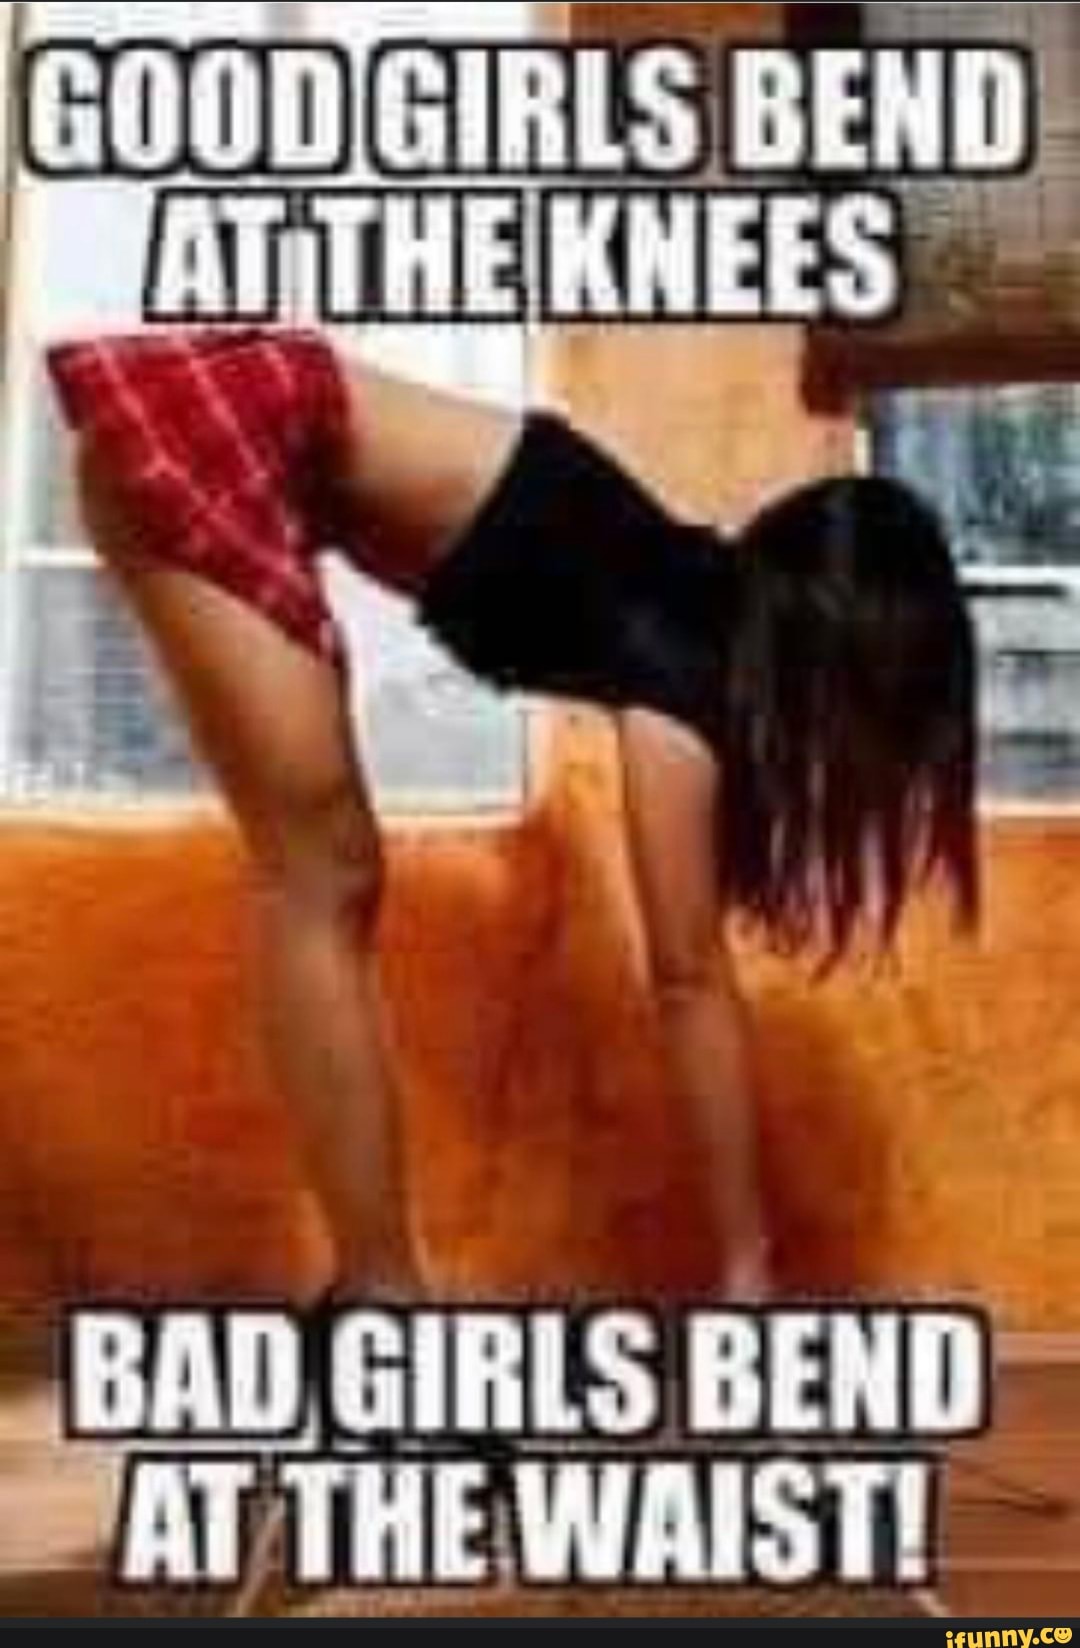 Bad girls bend at the waist